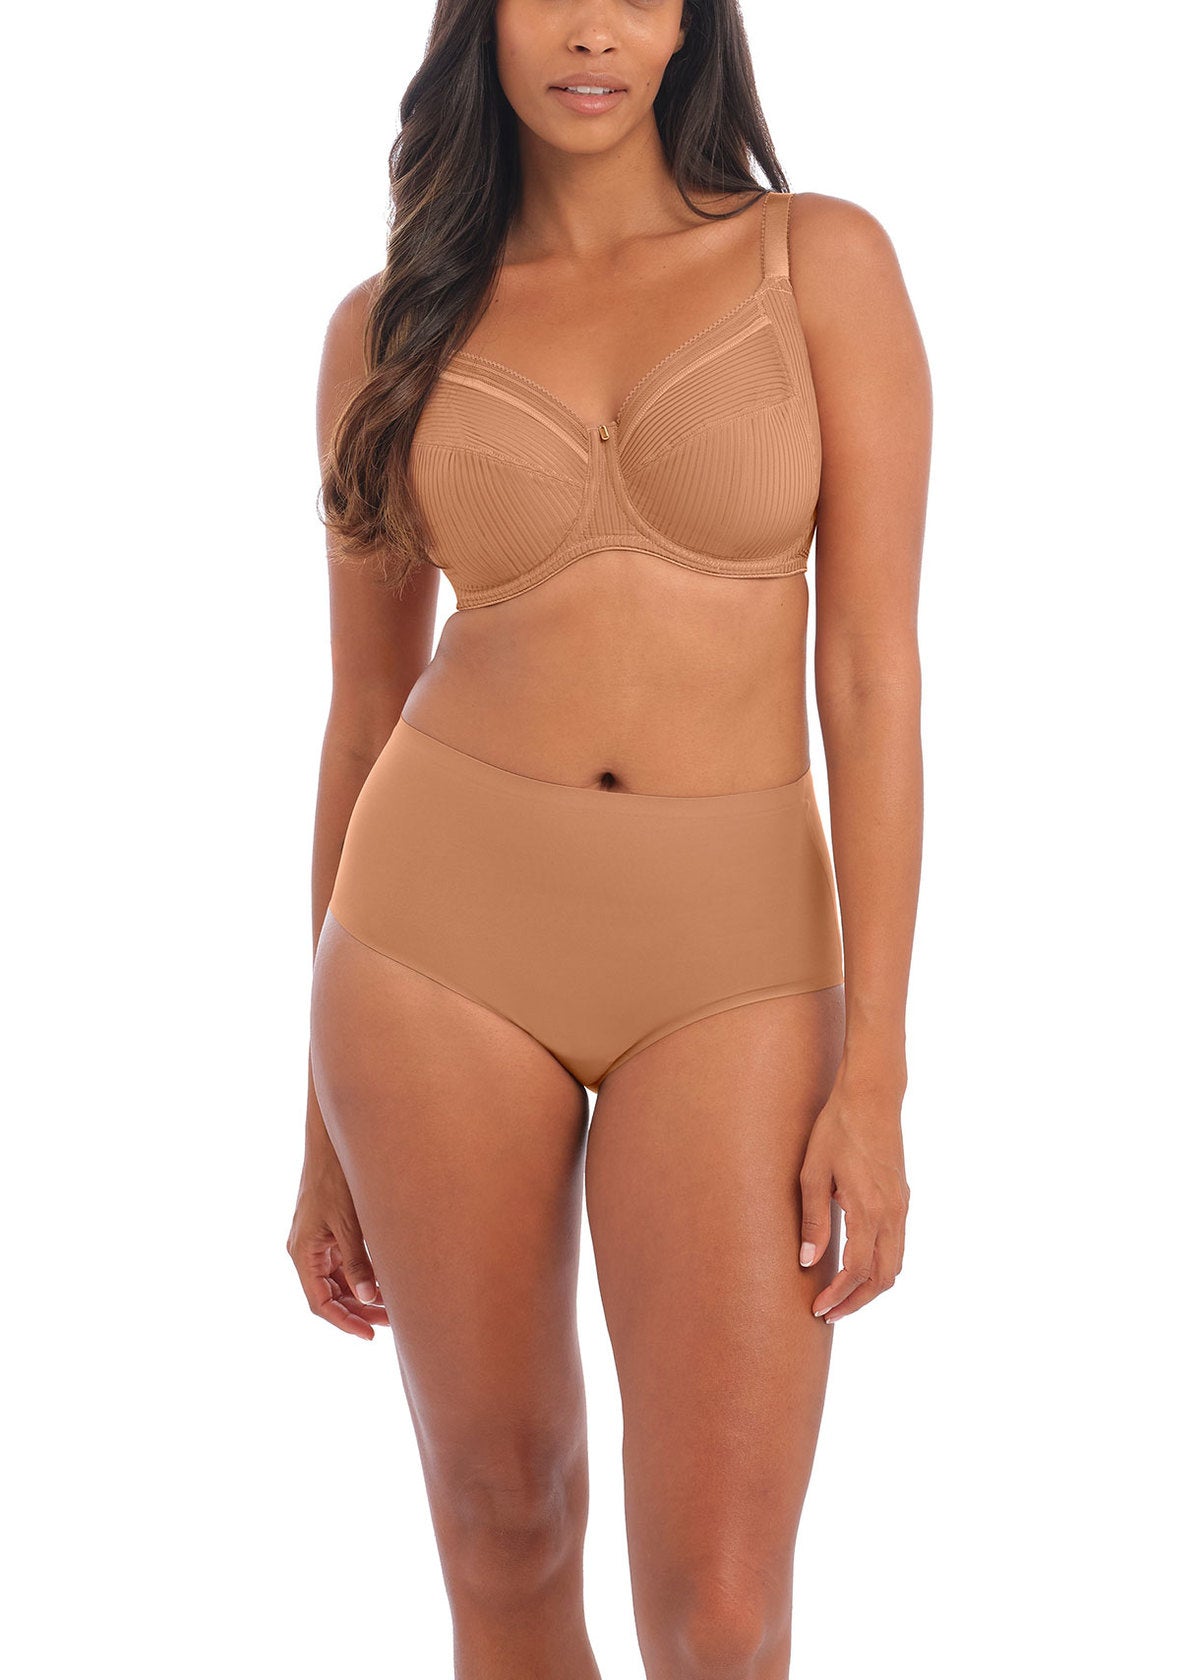 Fusion Full Cup Side Support Bra - Cinnamon